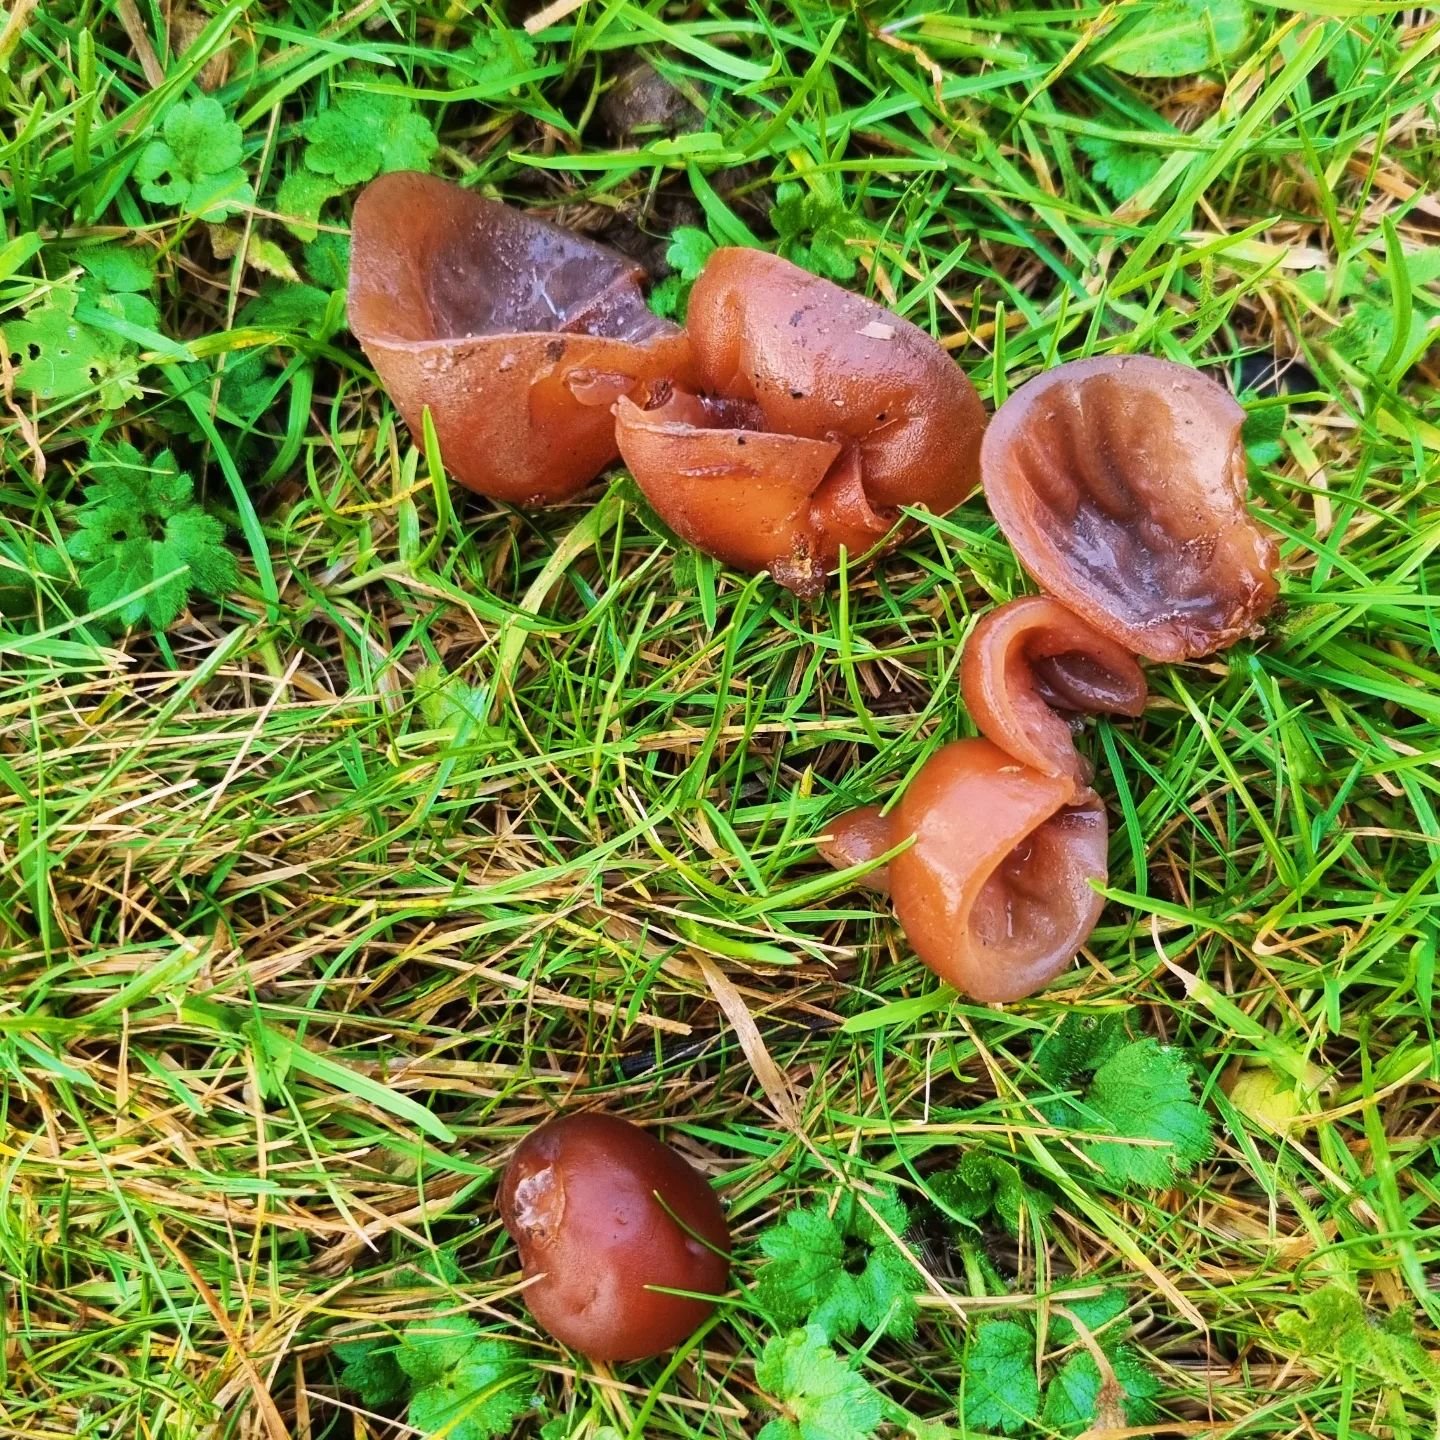 Jelly Ear mushrooms; edible, but they taste like &quot;Indian rubber with bones in it&quot; so not tried
#foraging #funghi